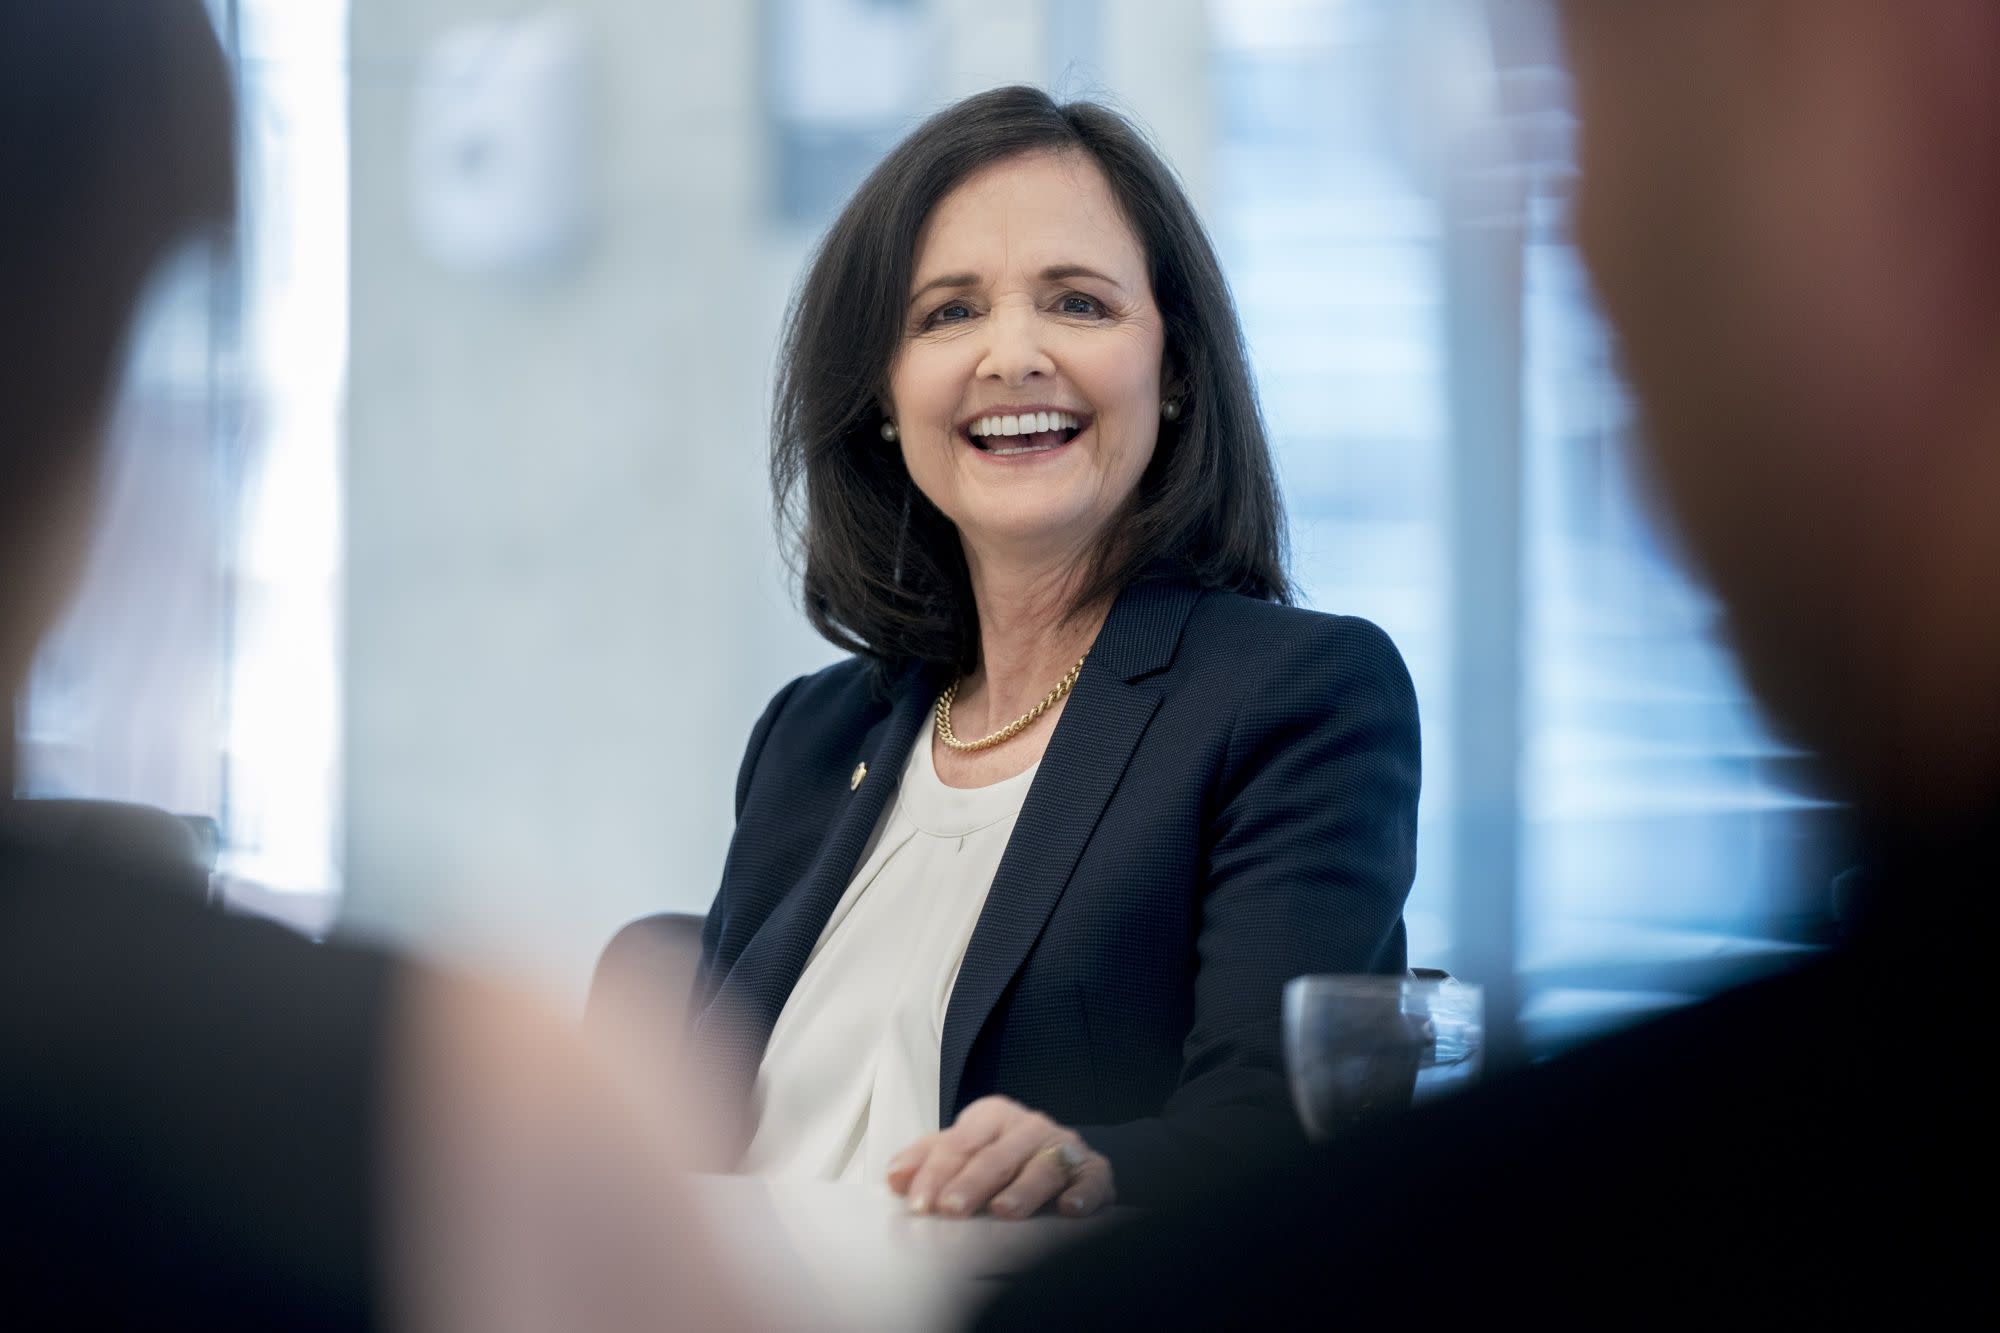 Trump’s Fed Pick Judy Shelton Cast Doubt on Central Bank Independence